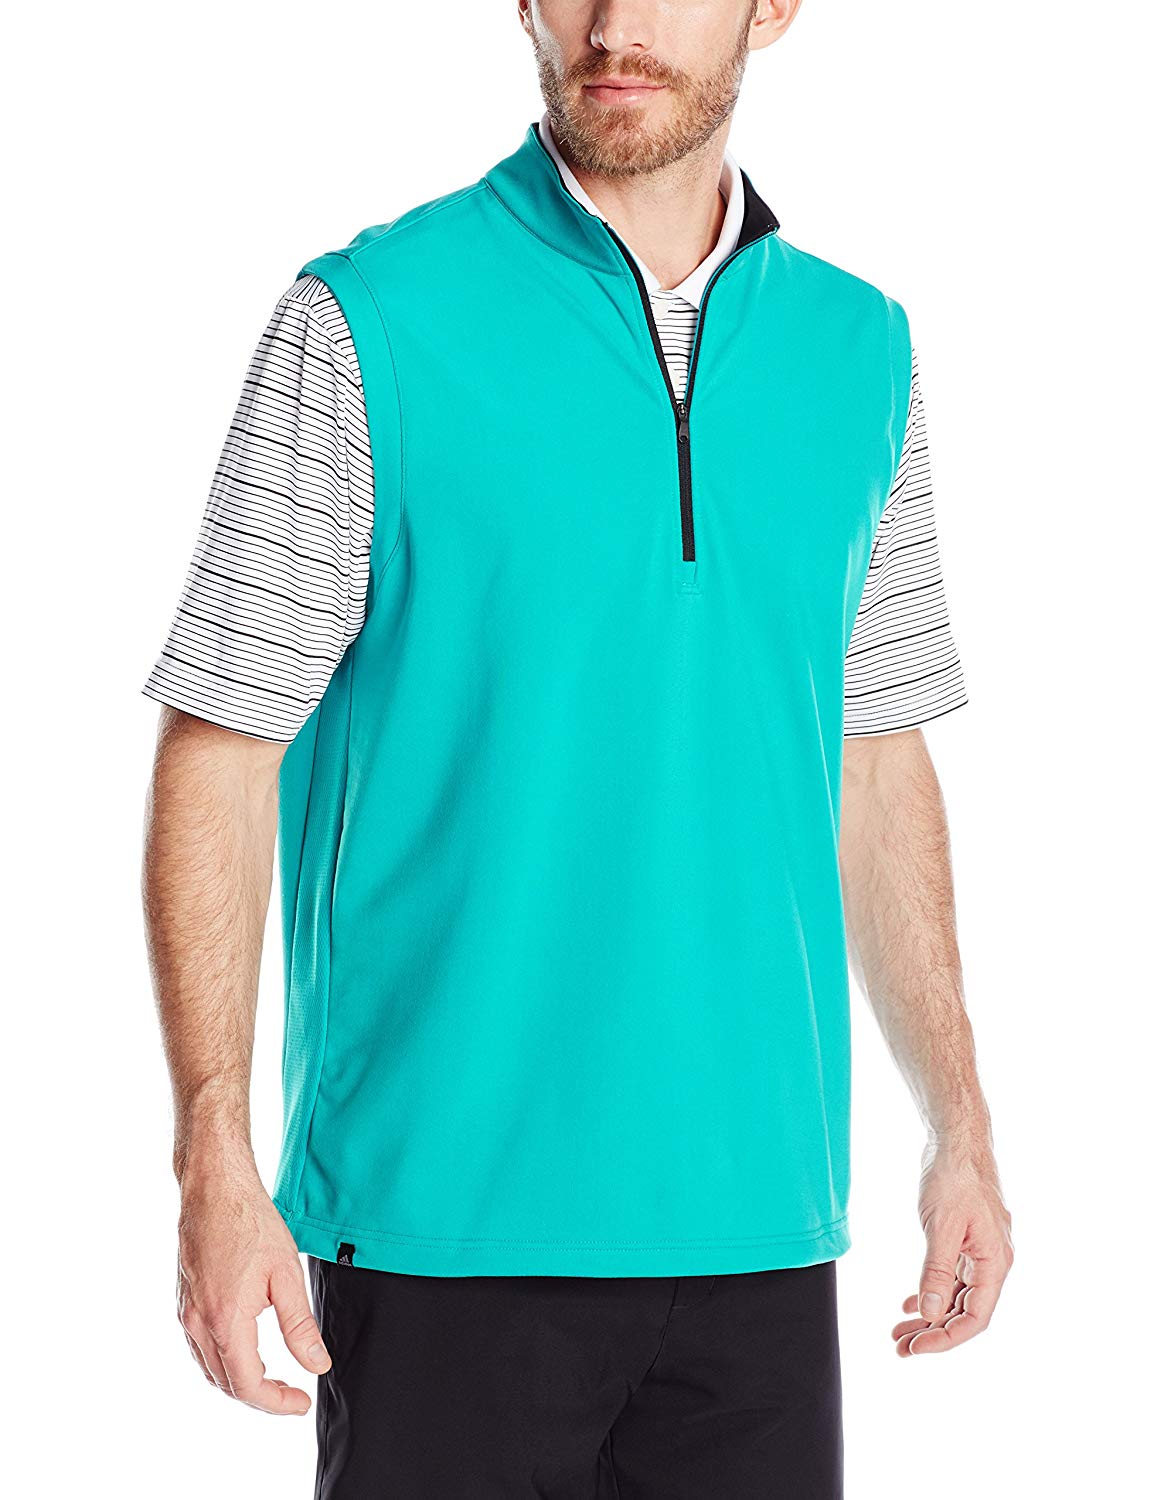 Mens Adidas Climacool Competition Golf Vests